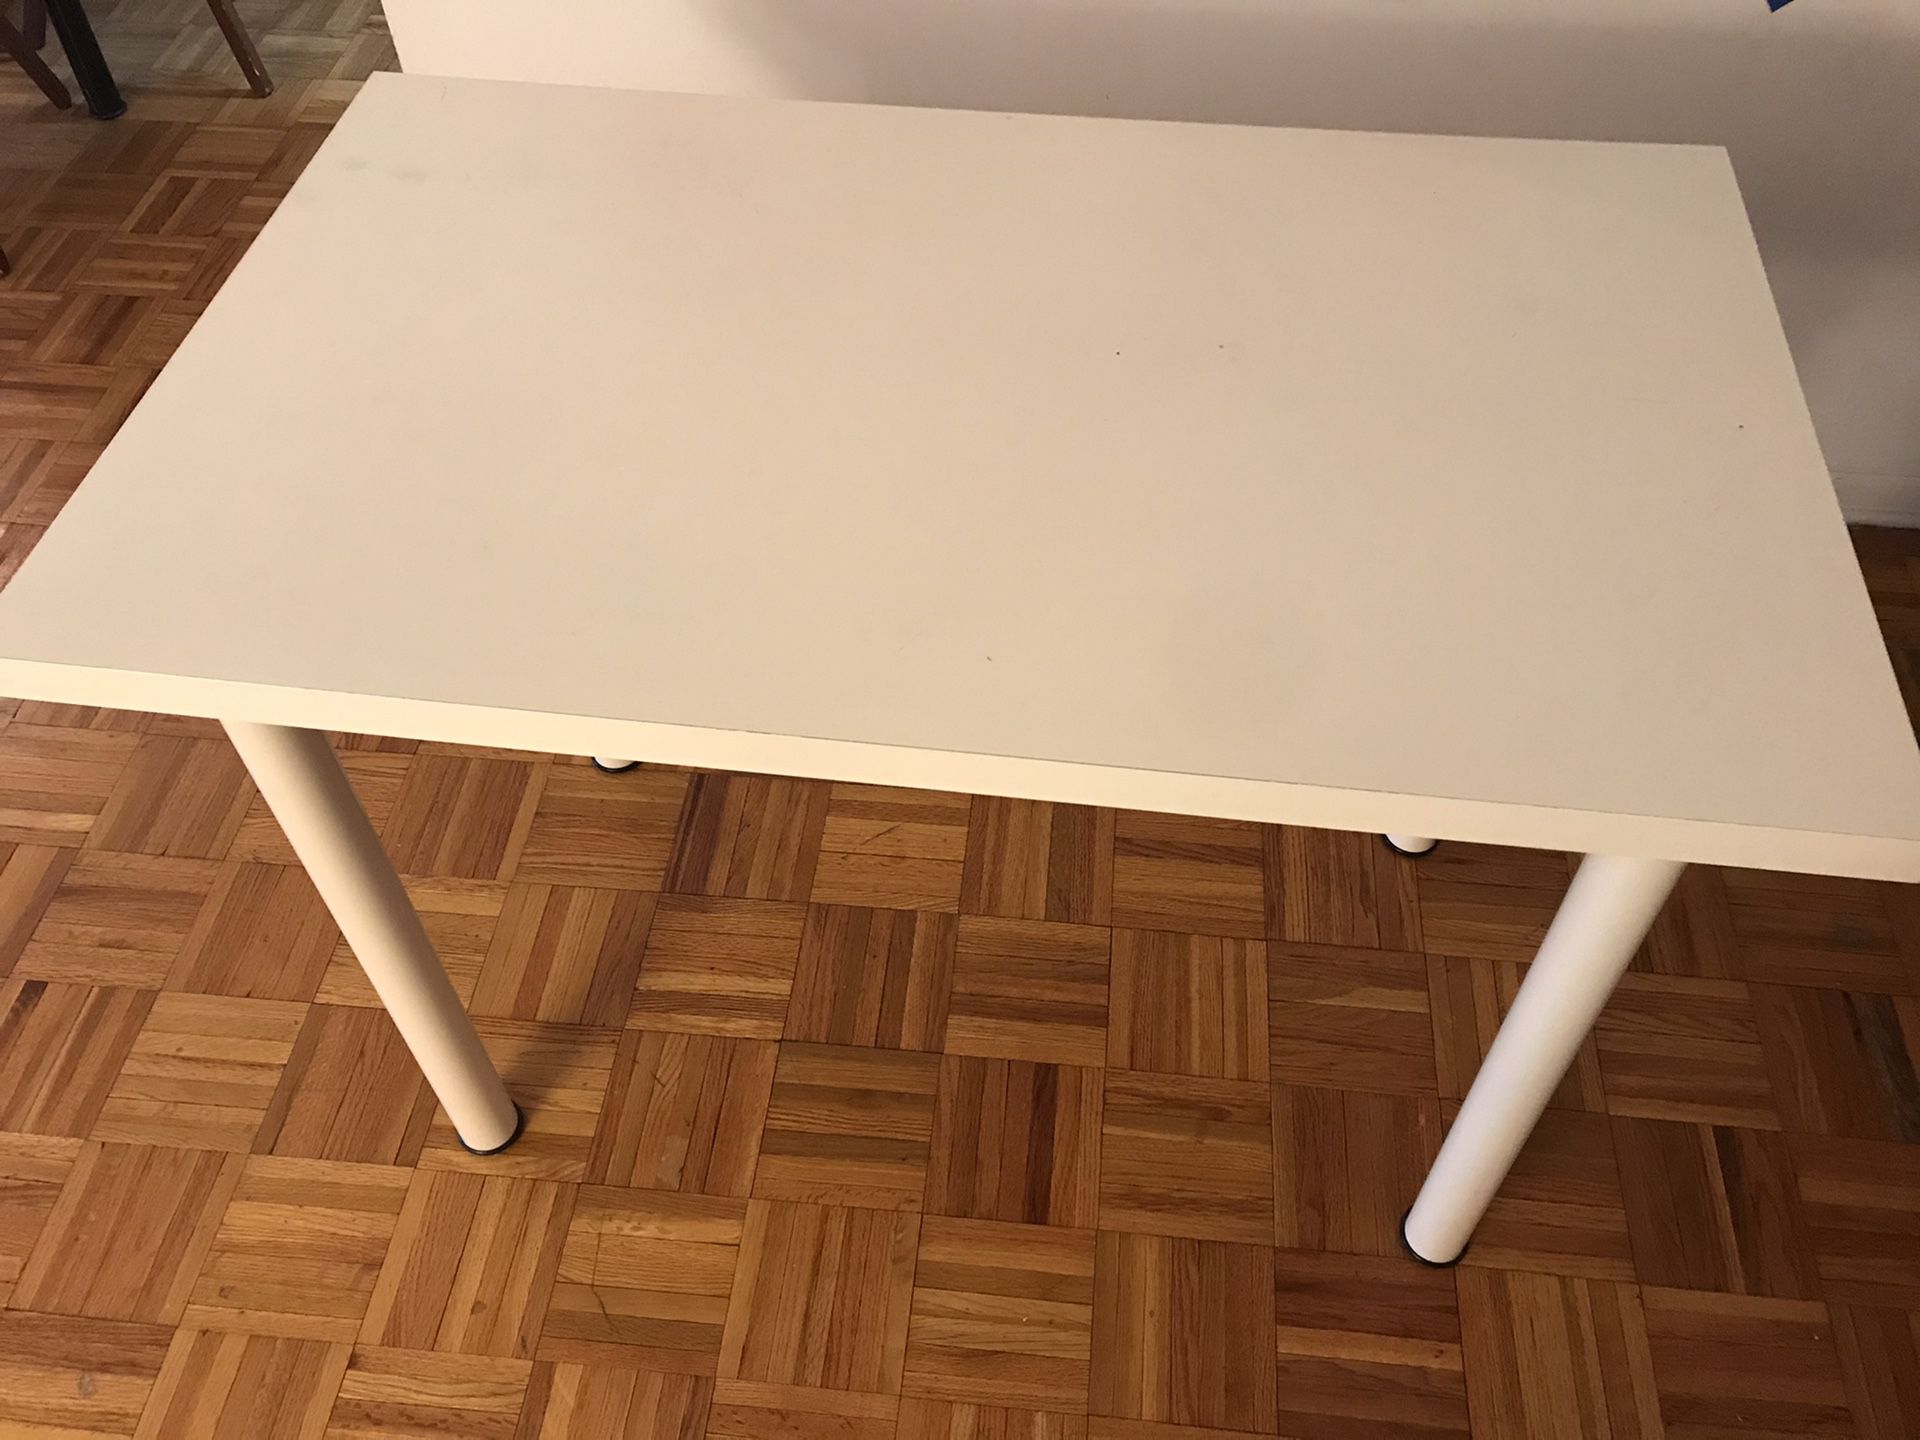 Table for kitchen or desk - used